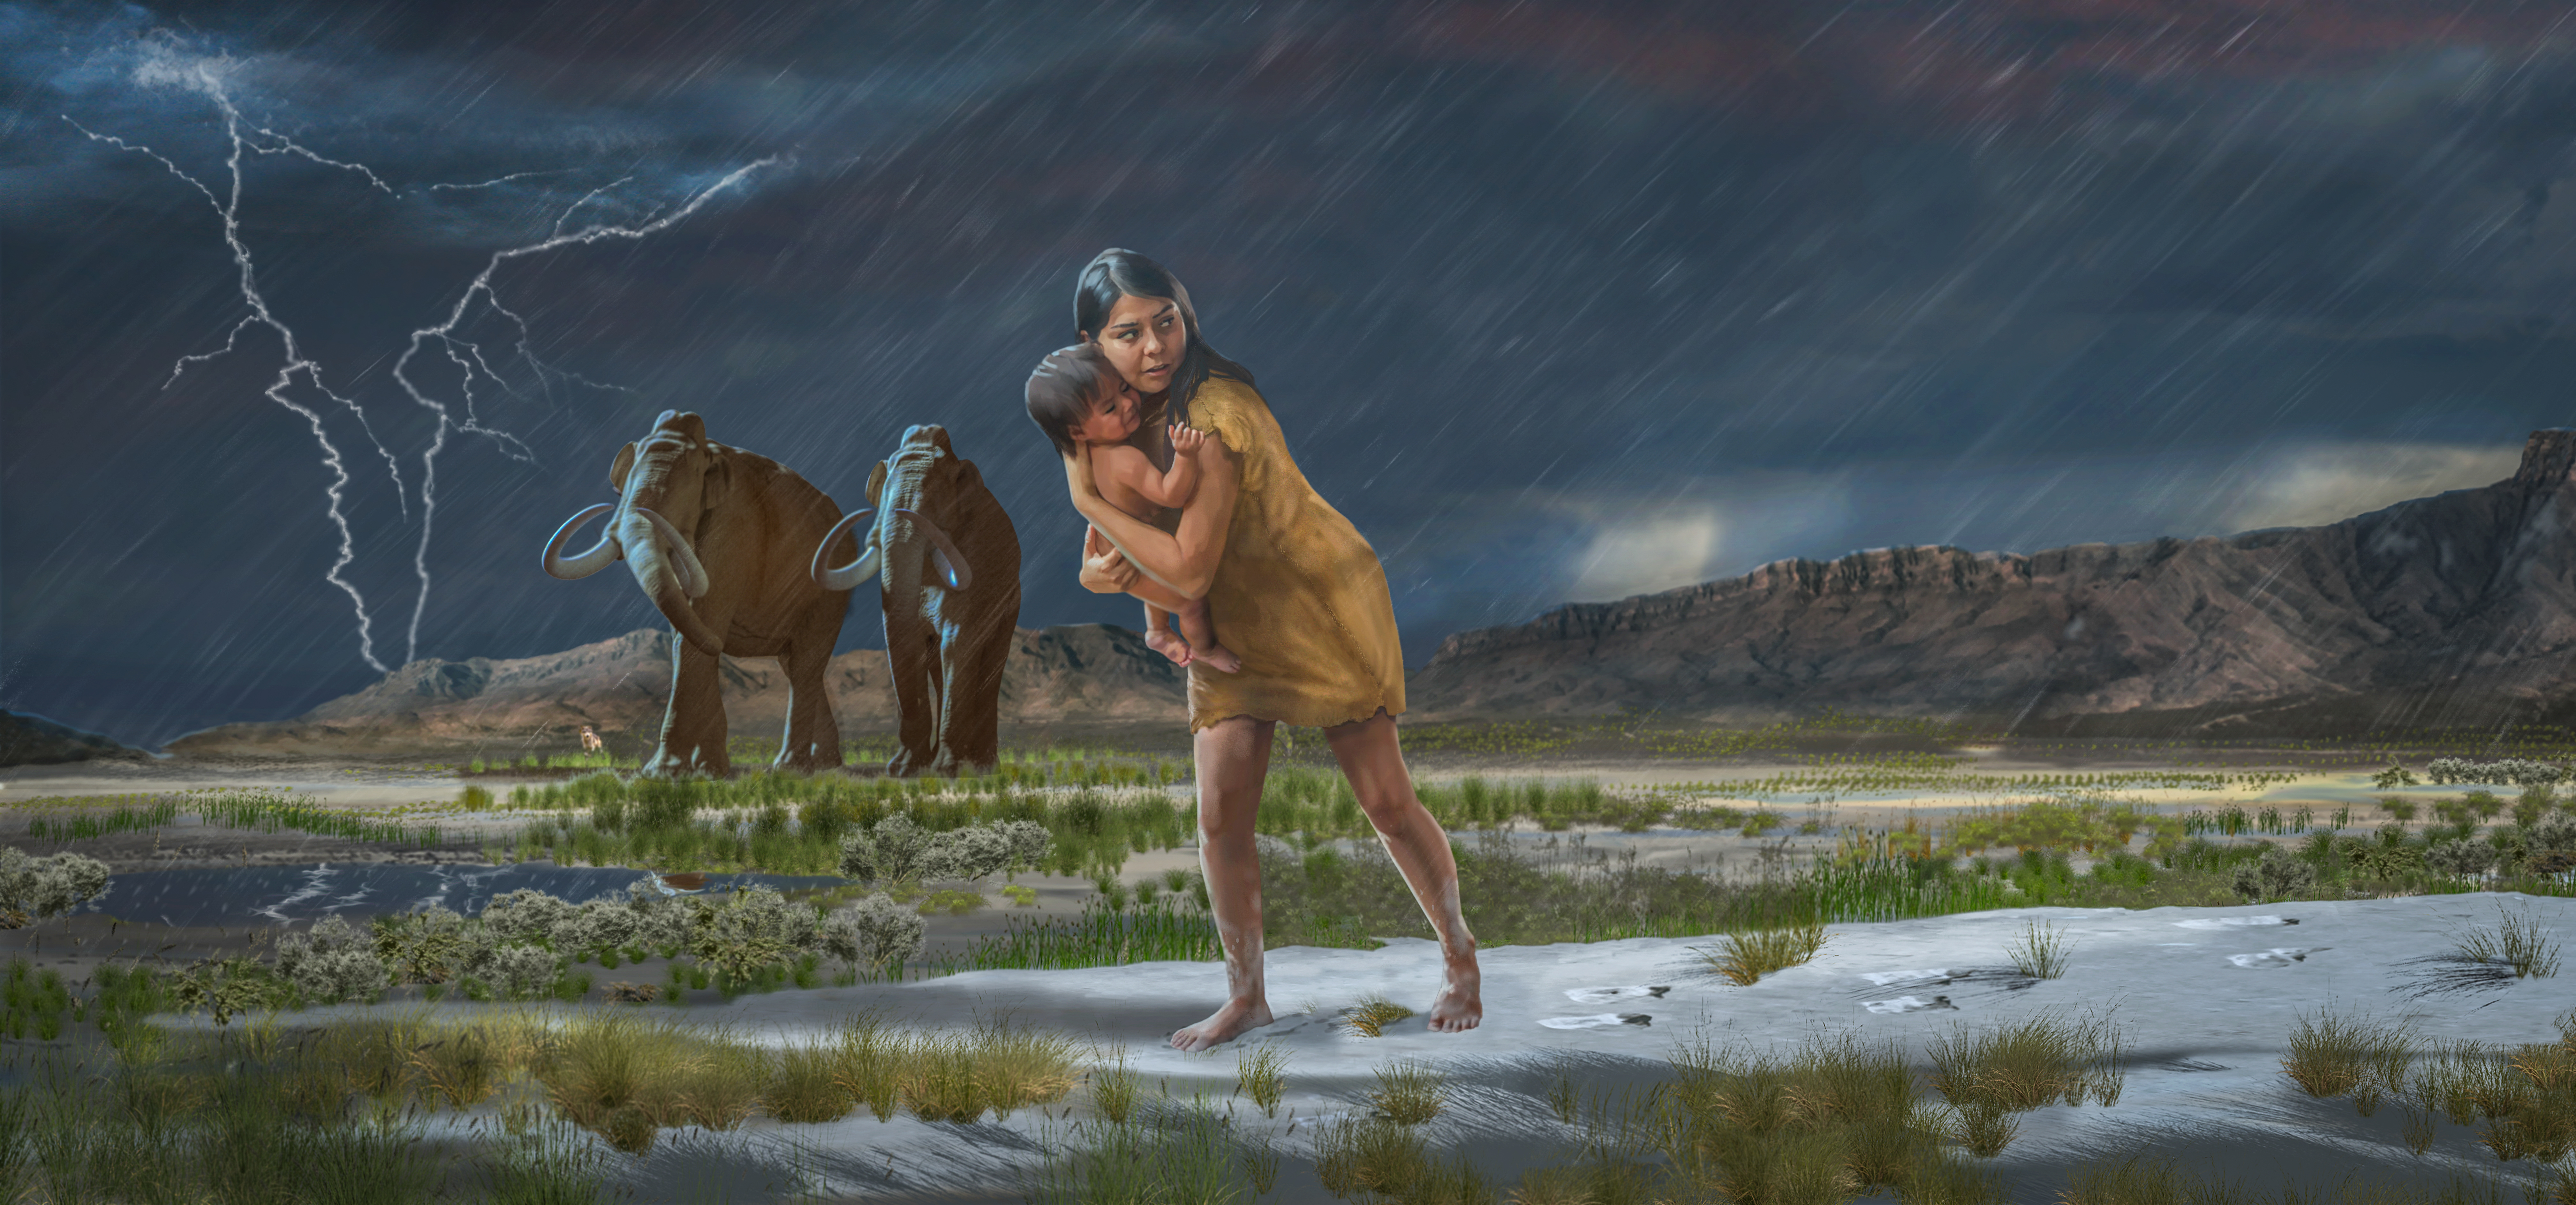 In a scene from the ice age, a woman holding a child on the shores of the ancient Lake Otero leave the footprints in the mud.